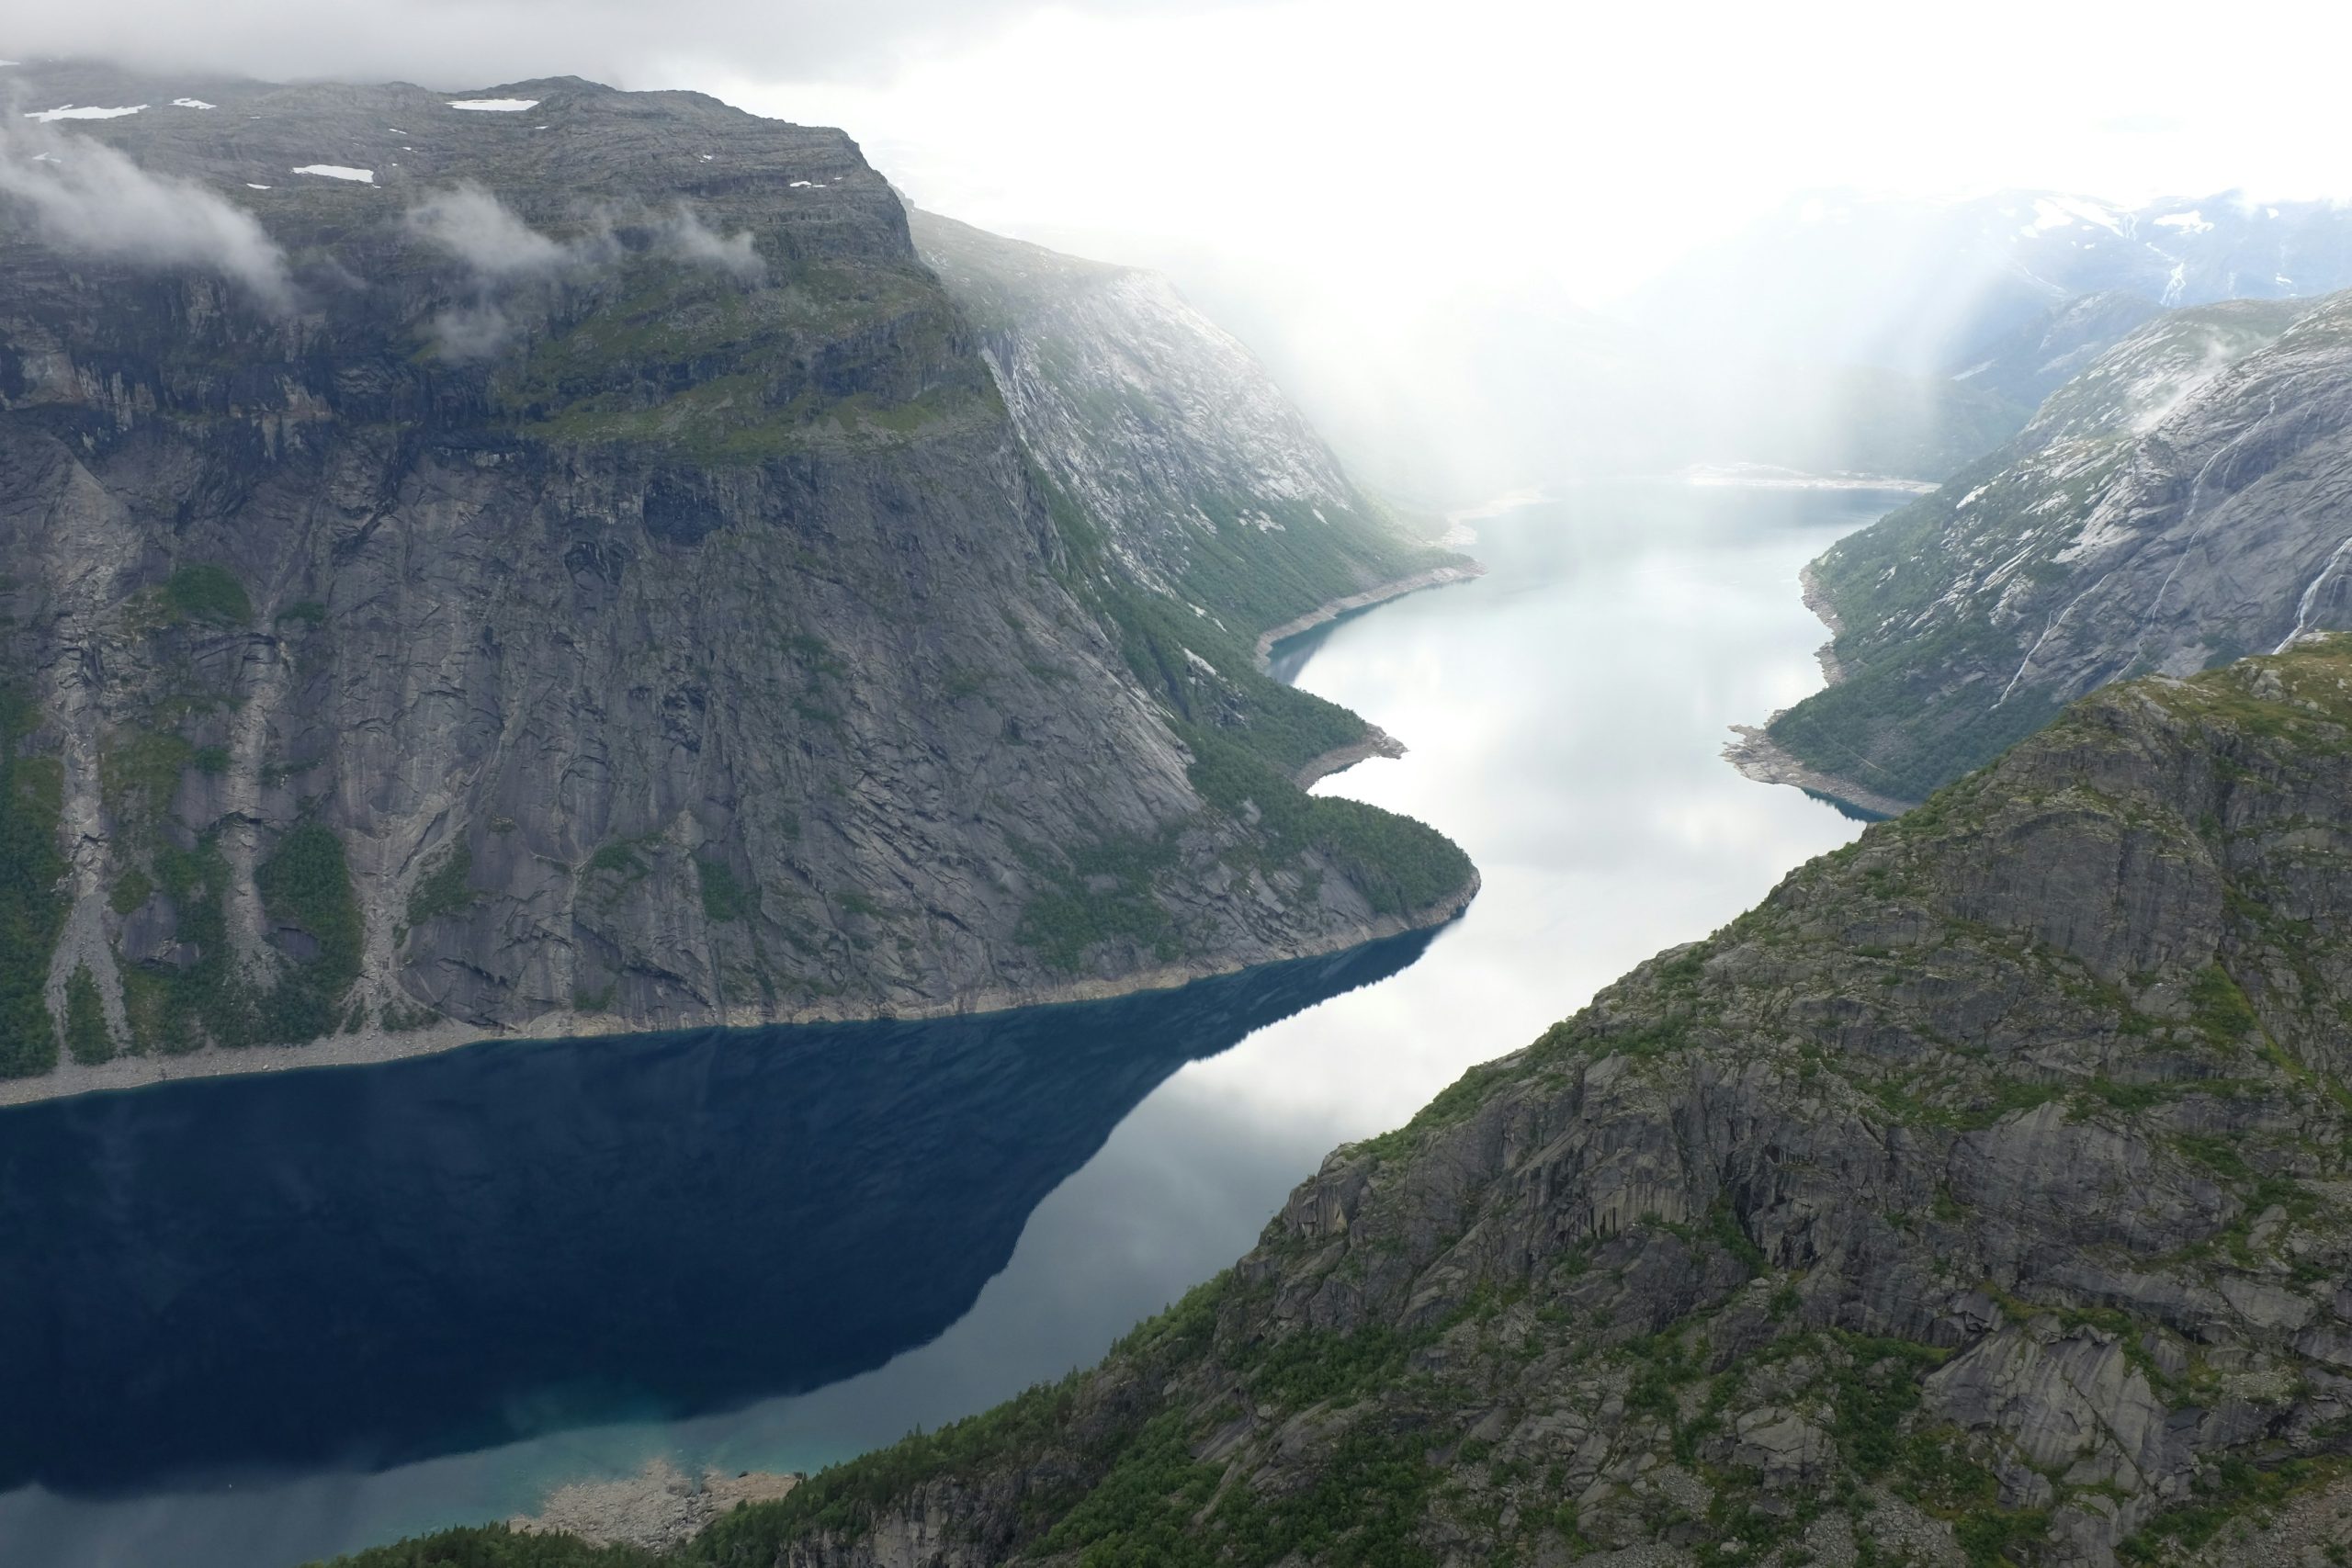 explore the breathtaking beauty of norway's fjords and immerse yourself in stunning natural landscapes.